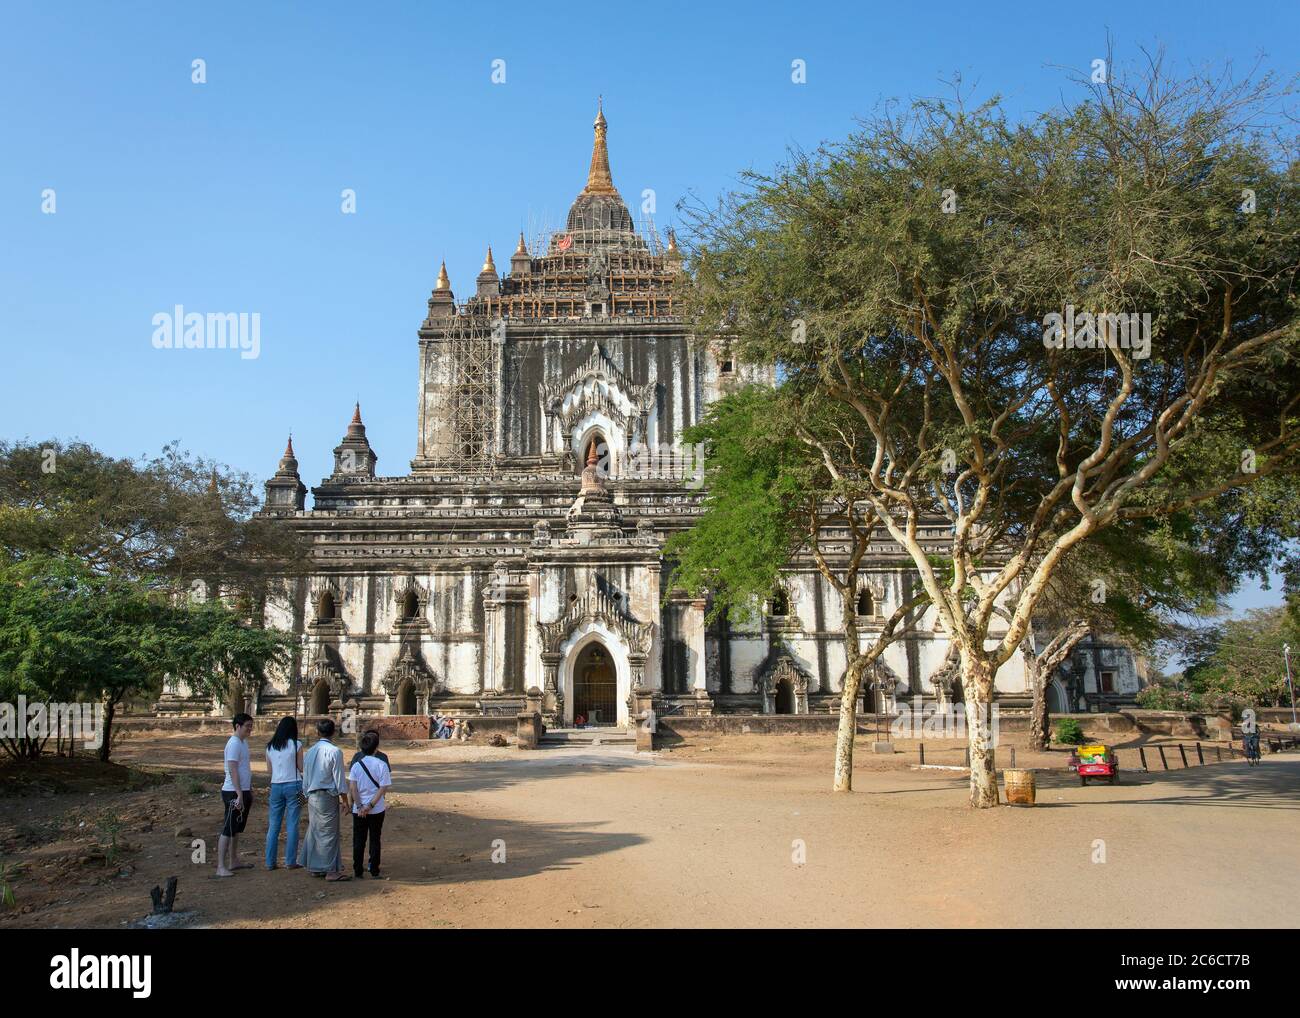 A group of tourists gaze at the exterior of the Thatbyinnyu temple in Bagan, Myanmar Stock Photo